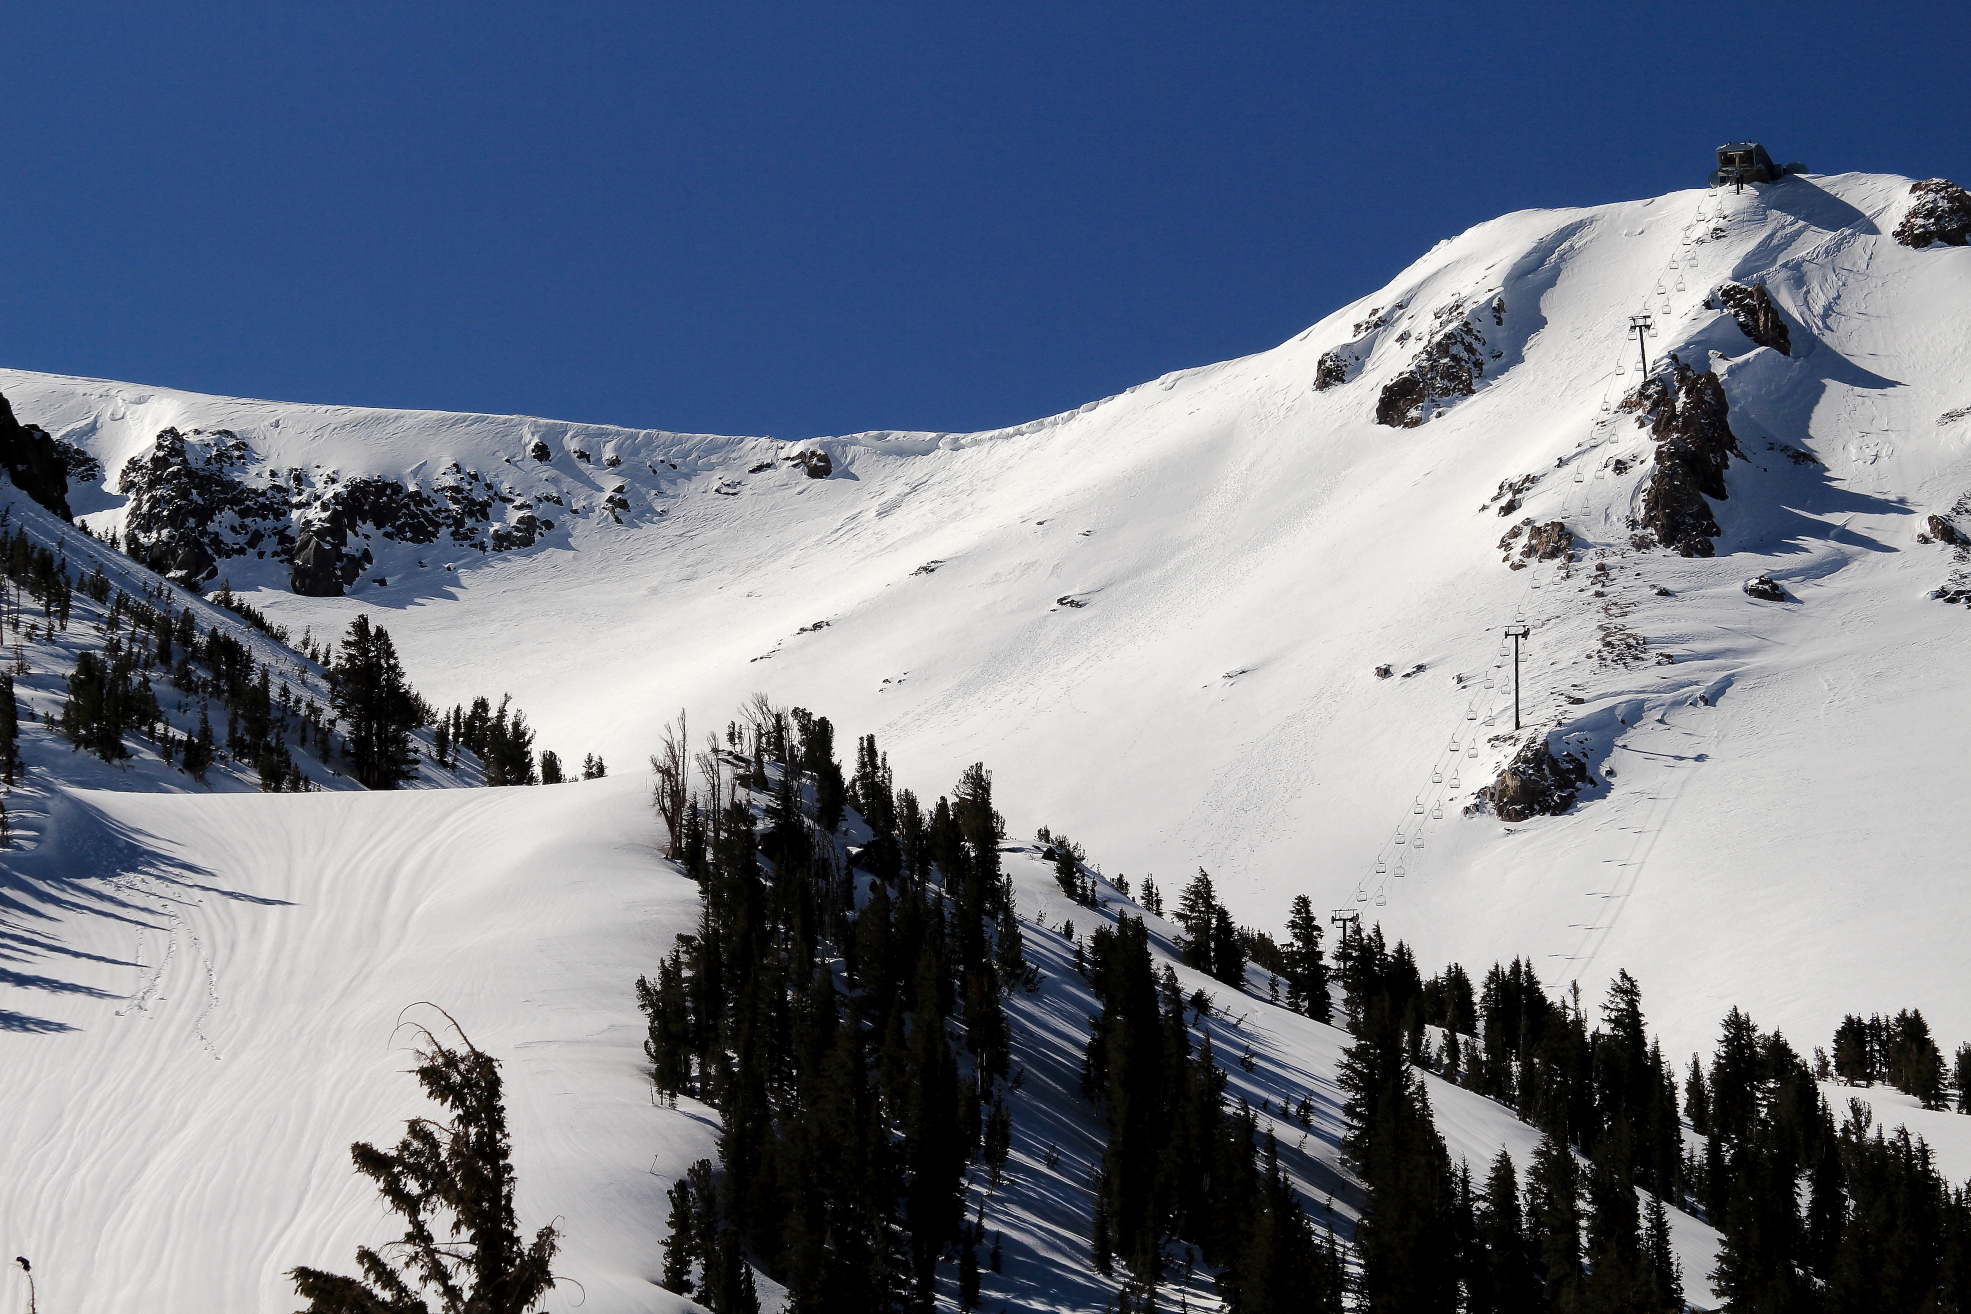 Cornice Bowl to the Drop Outs